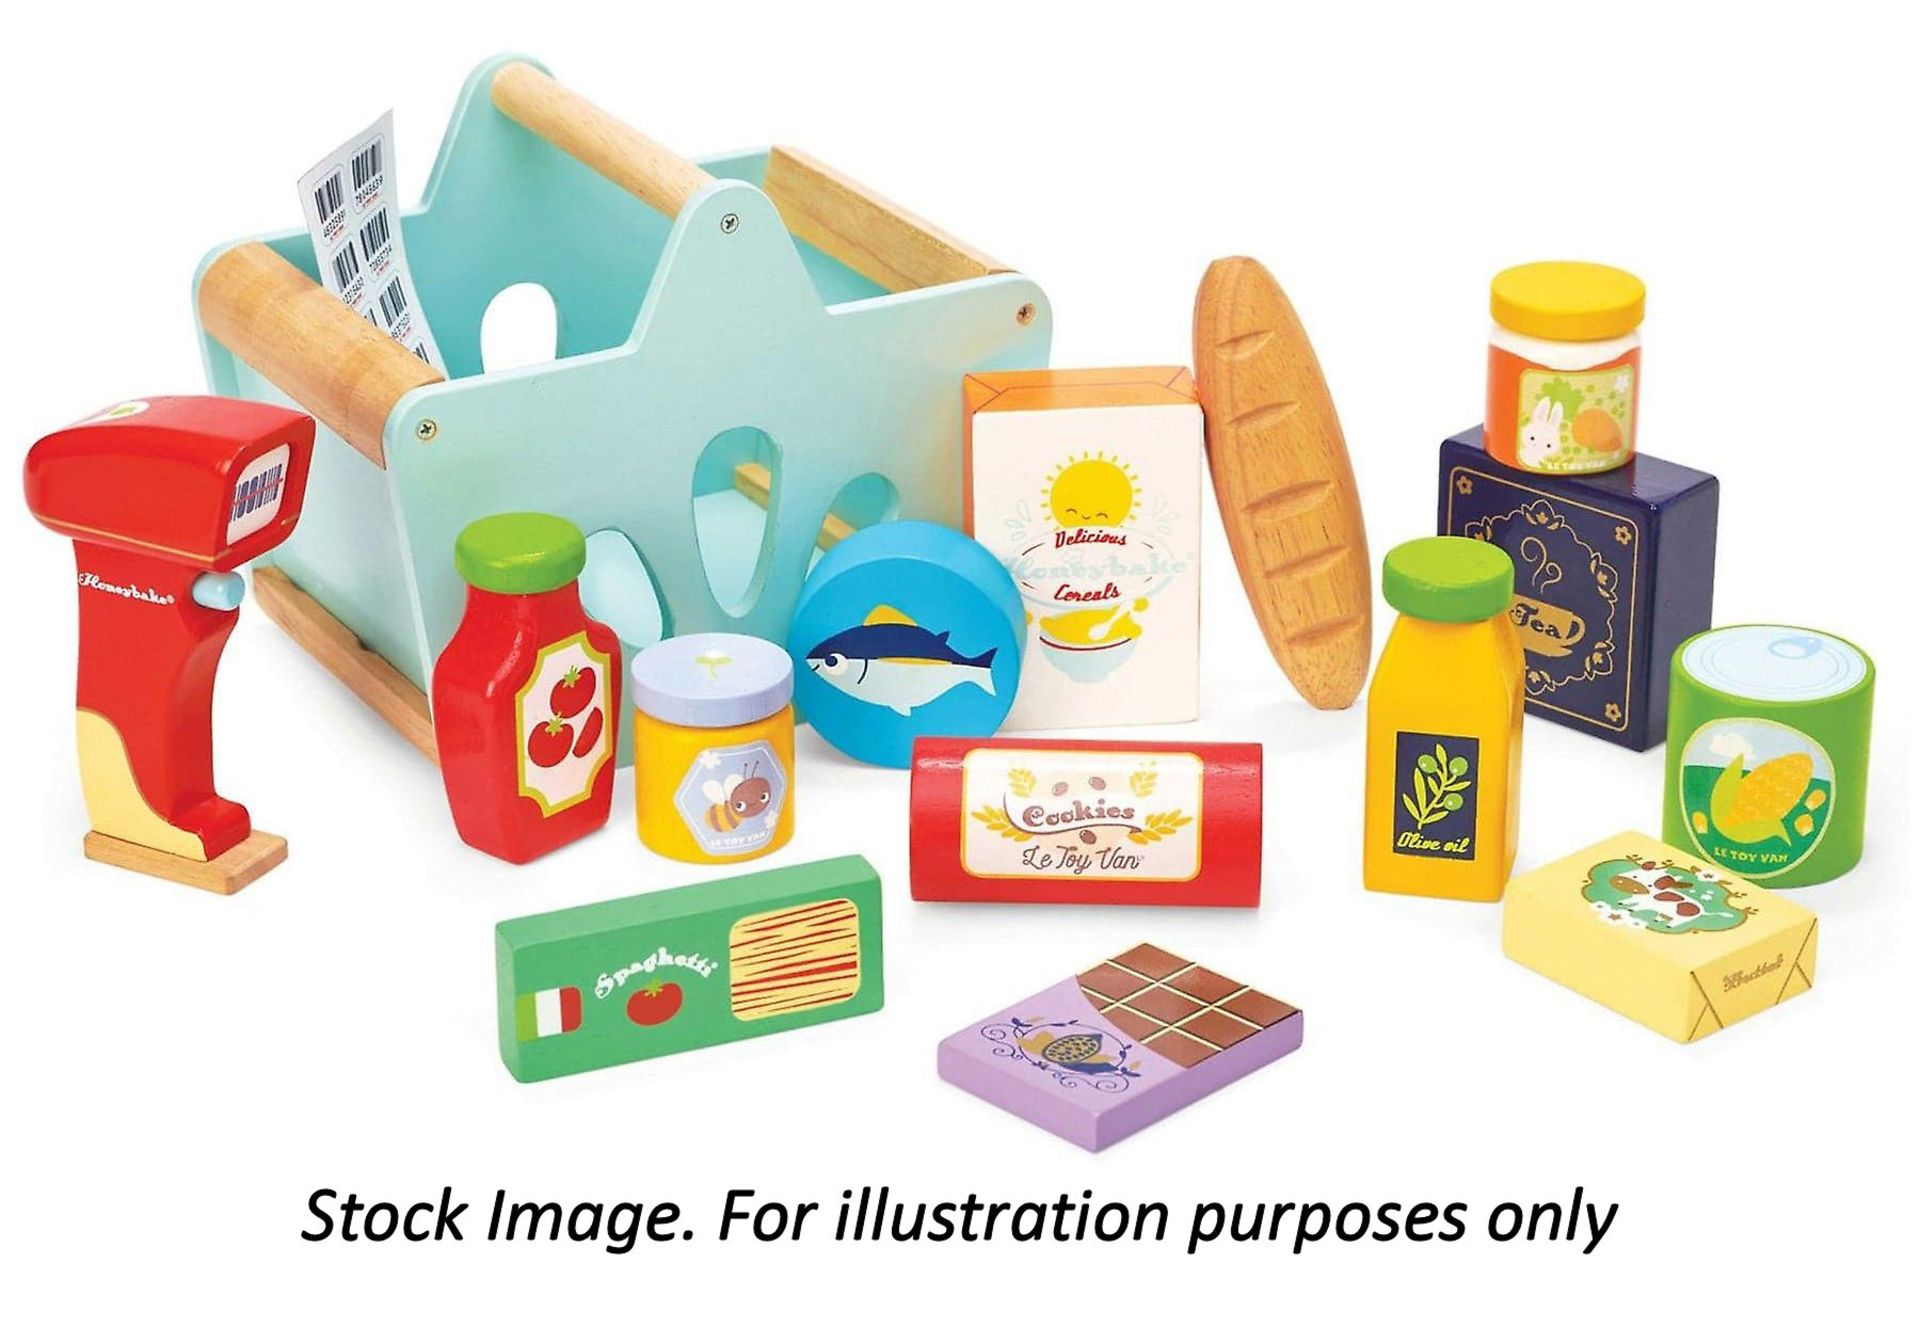 1 x Honeybake Wooden Grocery Set - New/Boxed - HTYS297 - CL987 - Location: Altrincham WA14 - RRP: £